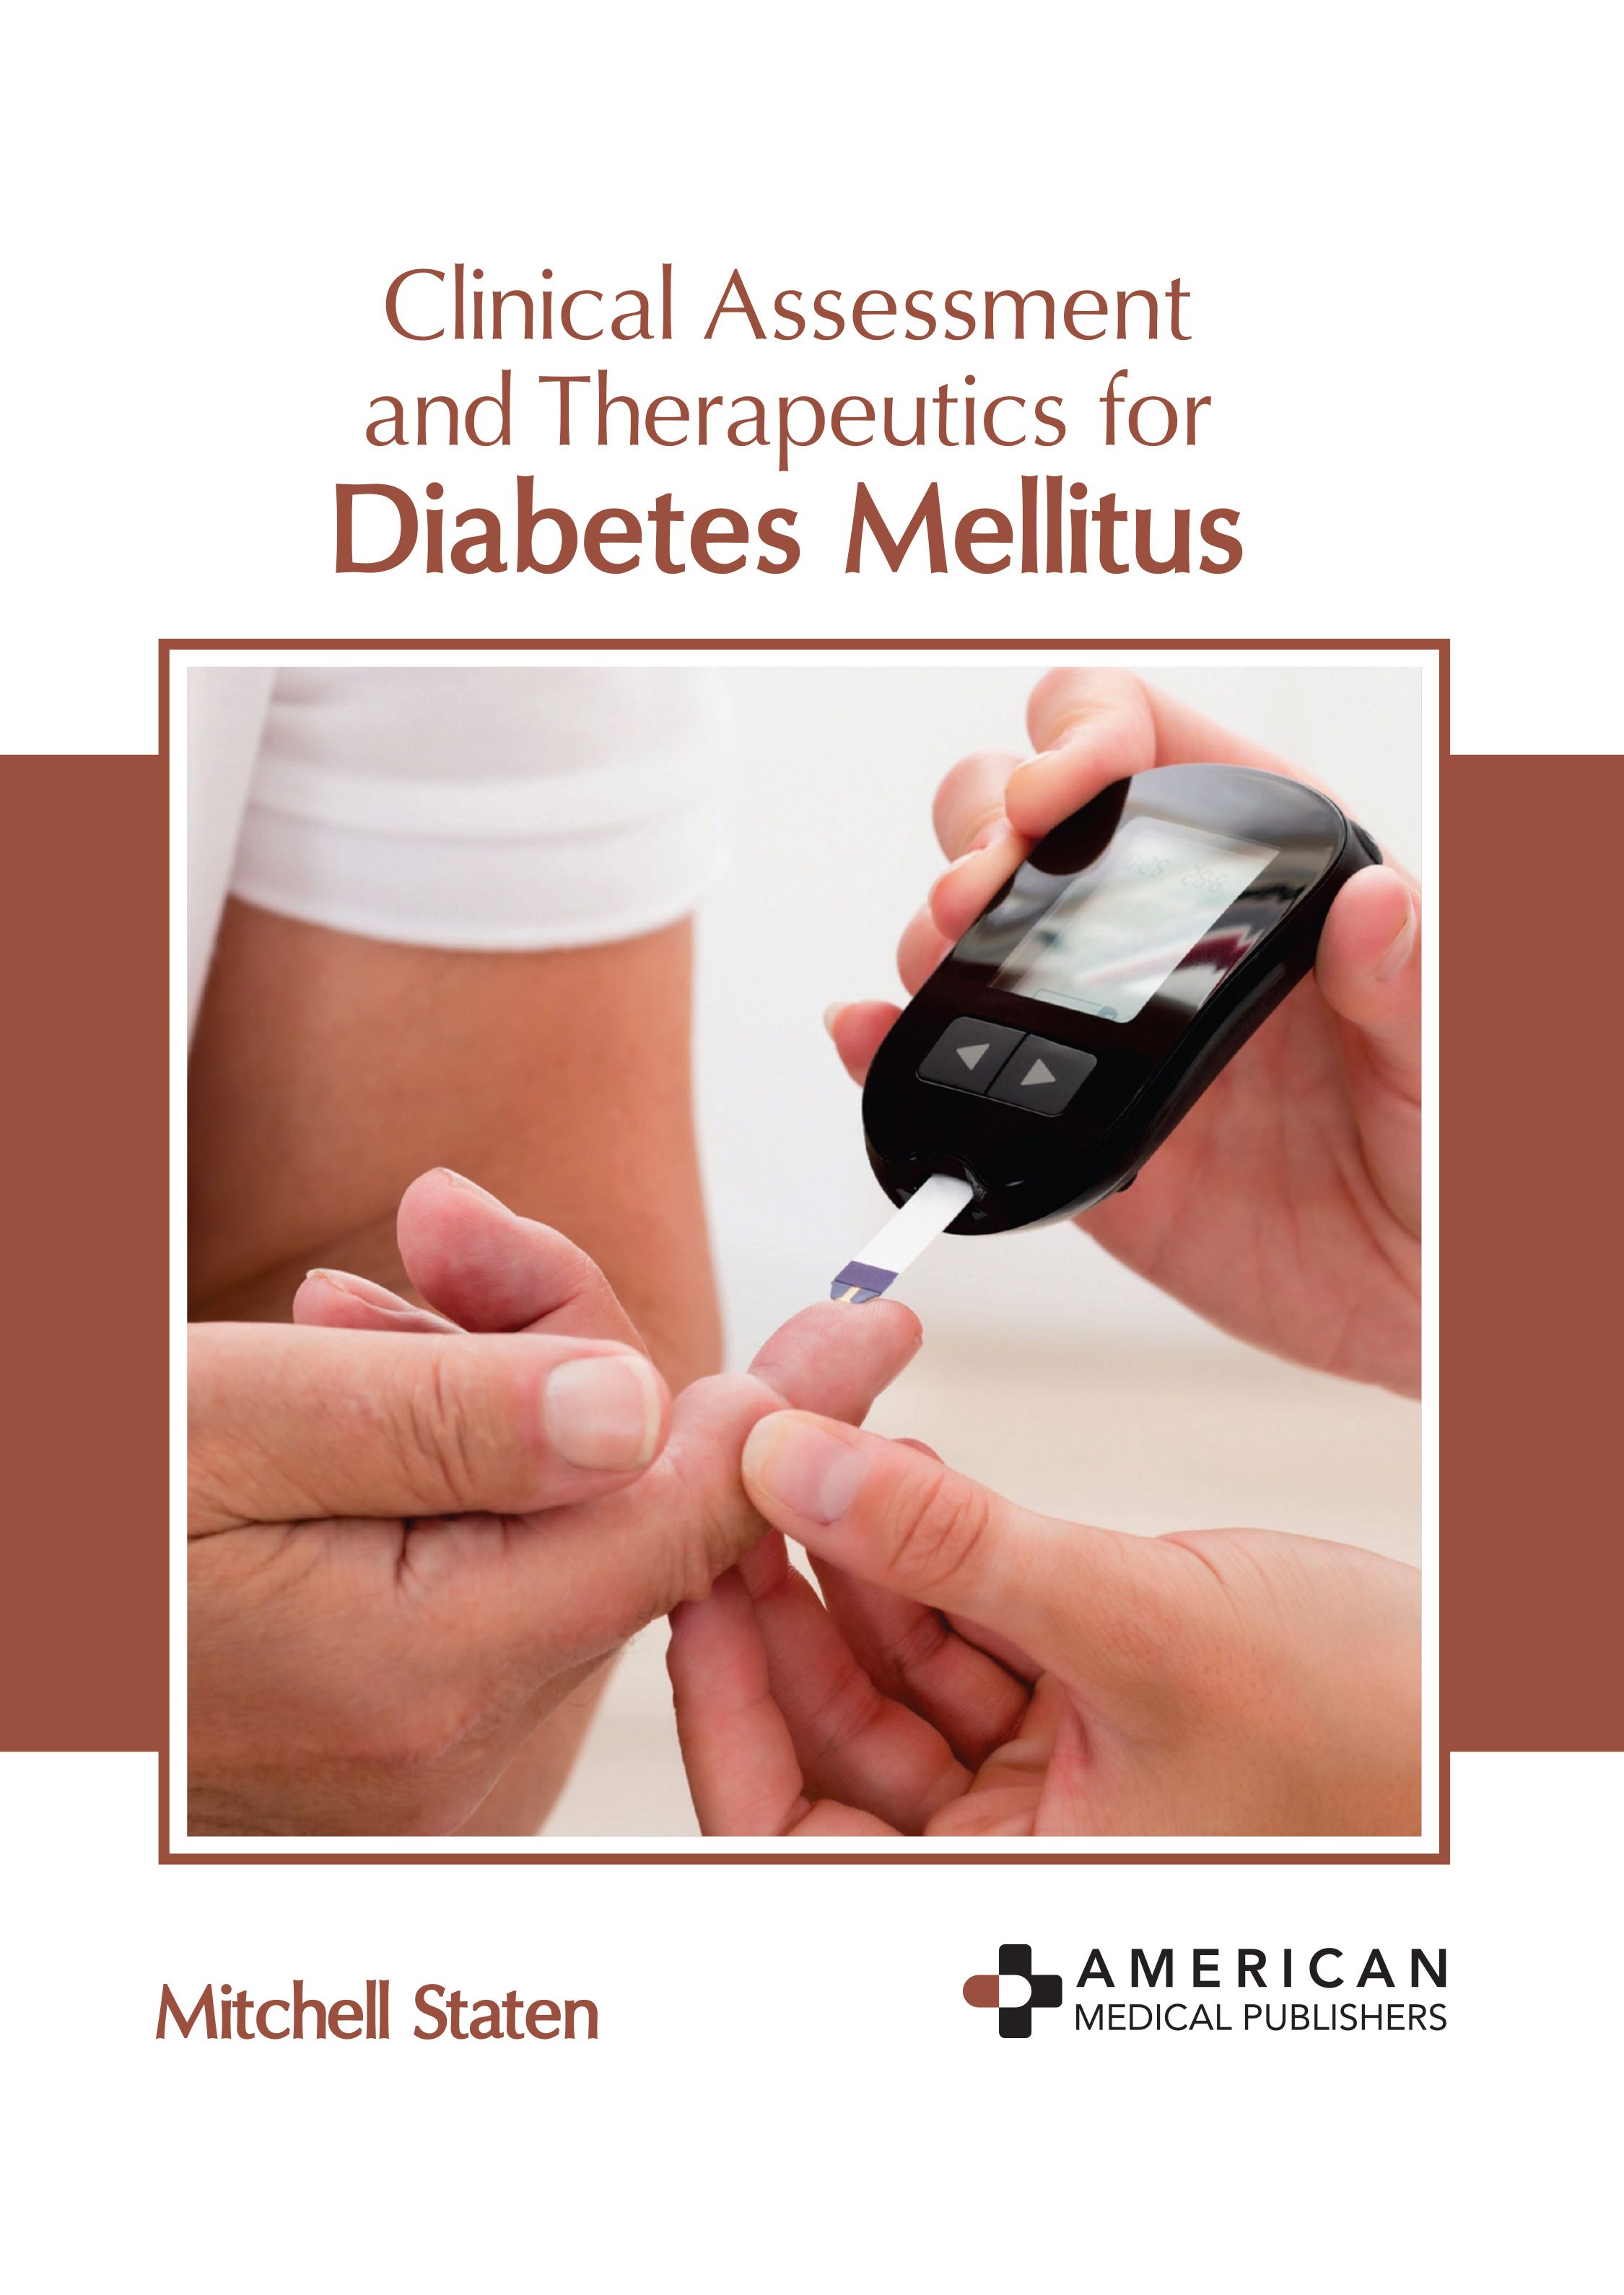 

exclusive-publishers/american-medical-publishers/clinical-assessment-and-therapeutics-for-diabetes-mellitus-9798887400501